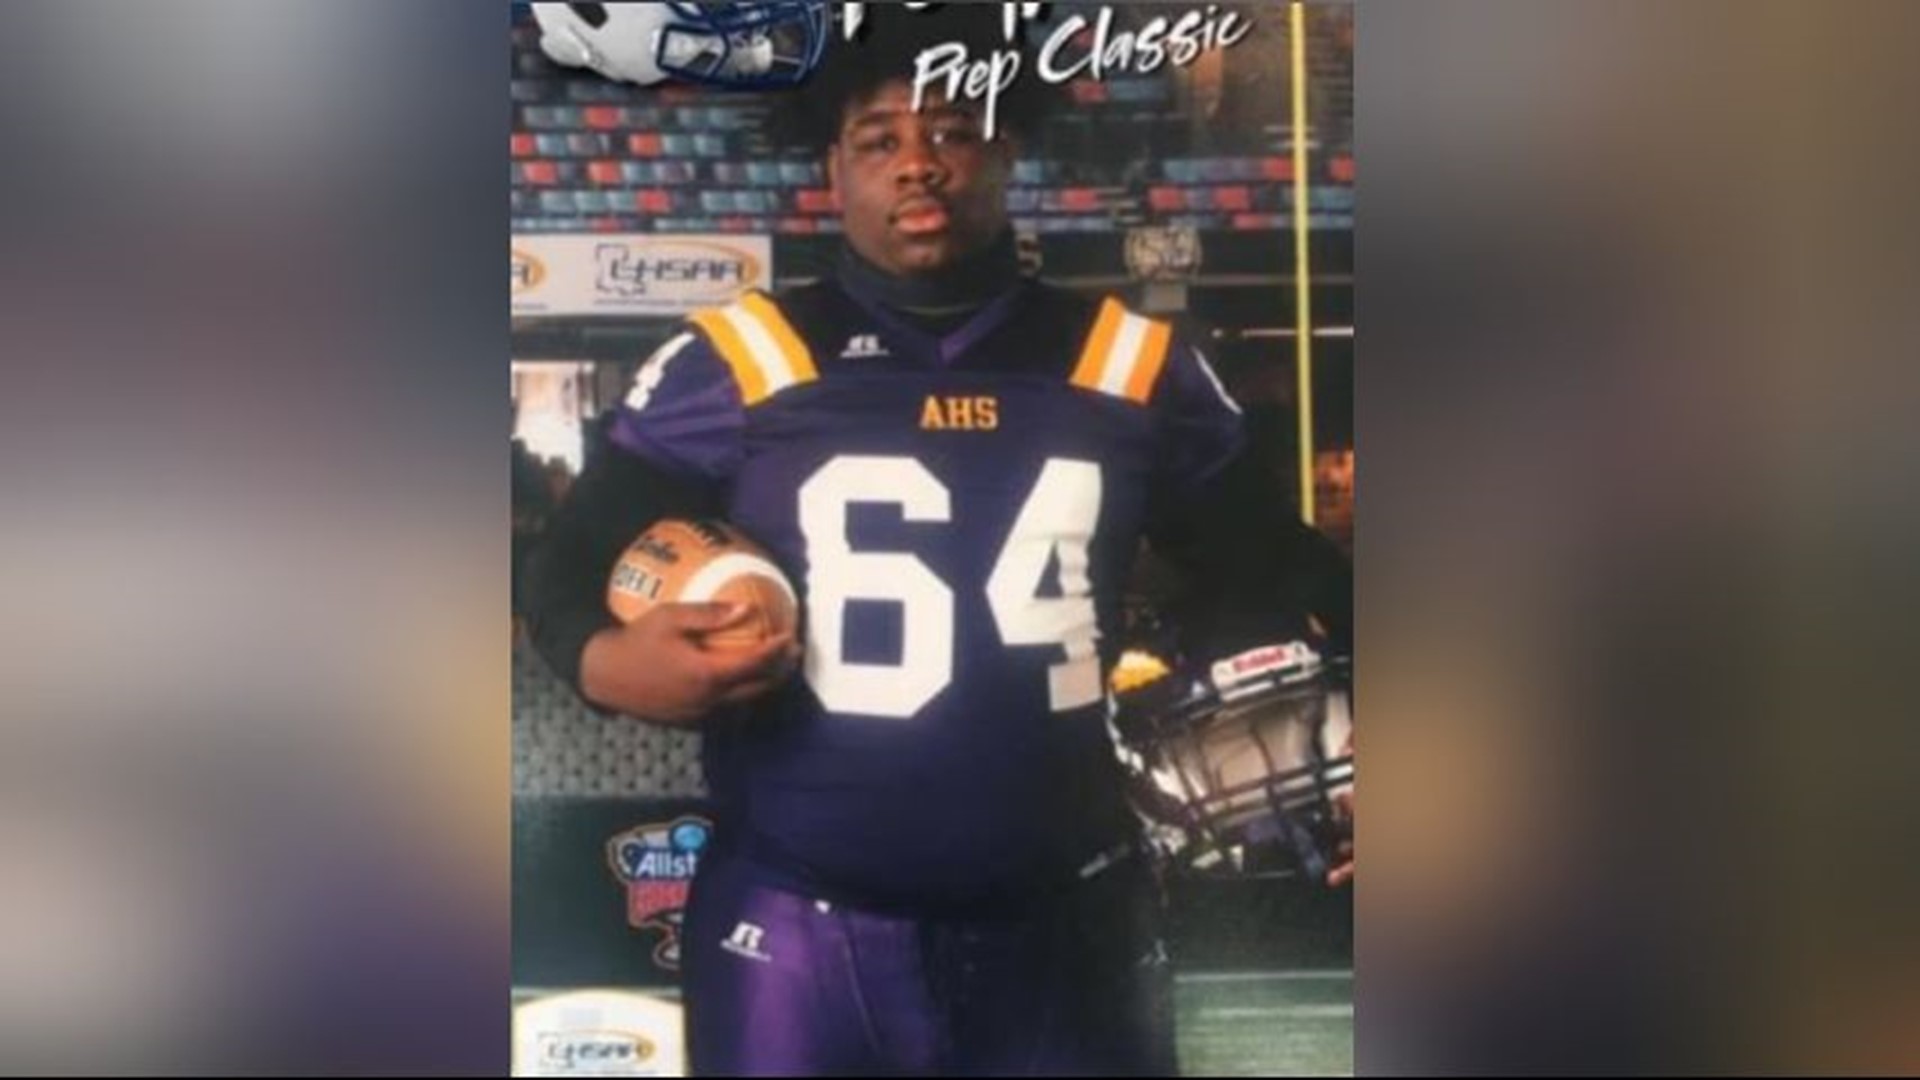 Amite Police Chief Jerry Trabonna says 15-year-old Terrance Allen was laughing and joking with teammates when he collapsed in the locker room around 9 p.m. Tuesday.